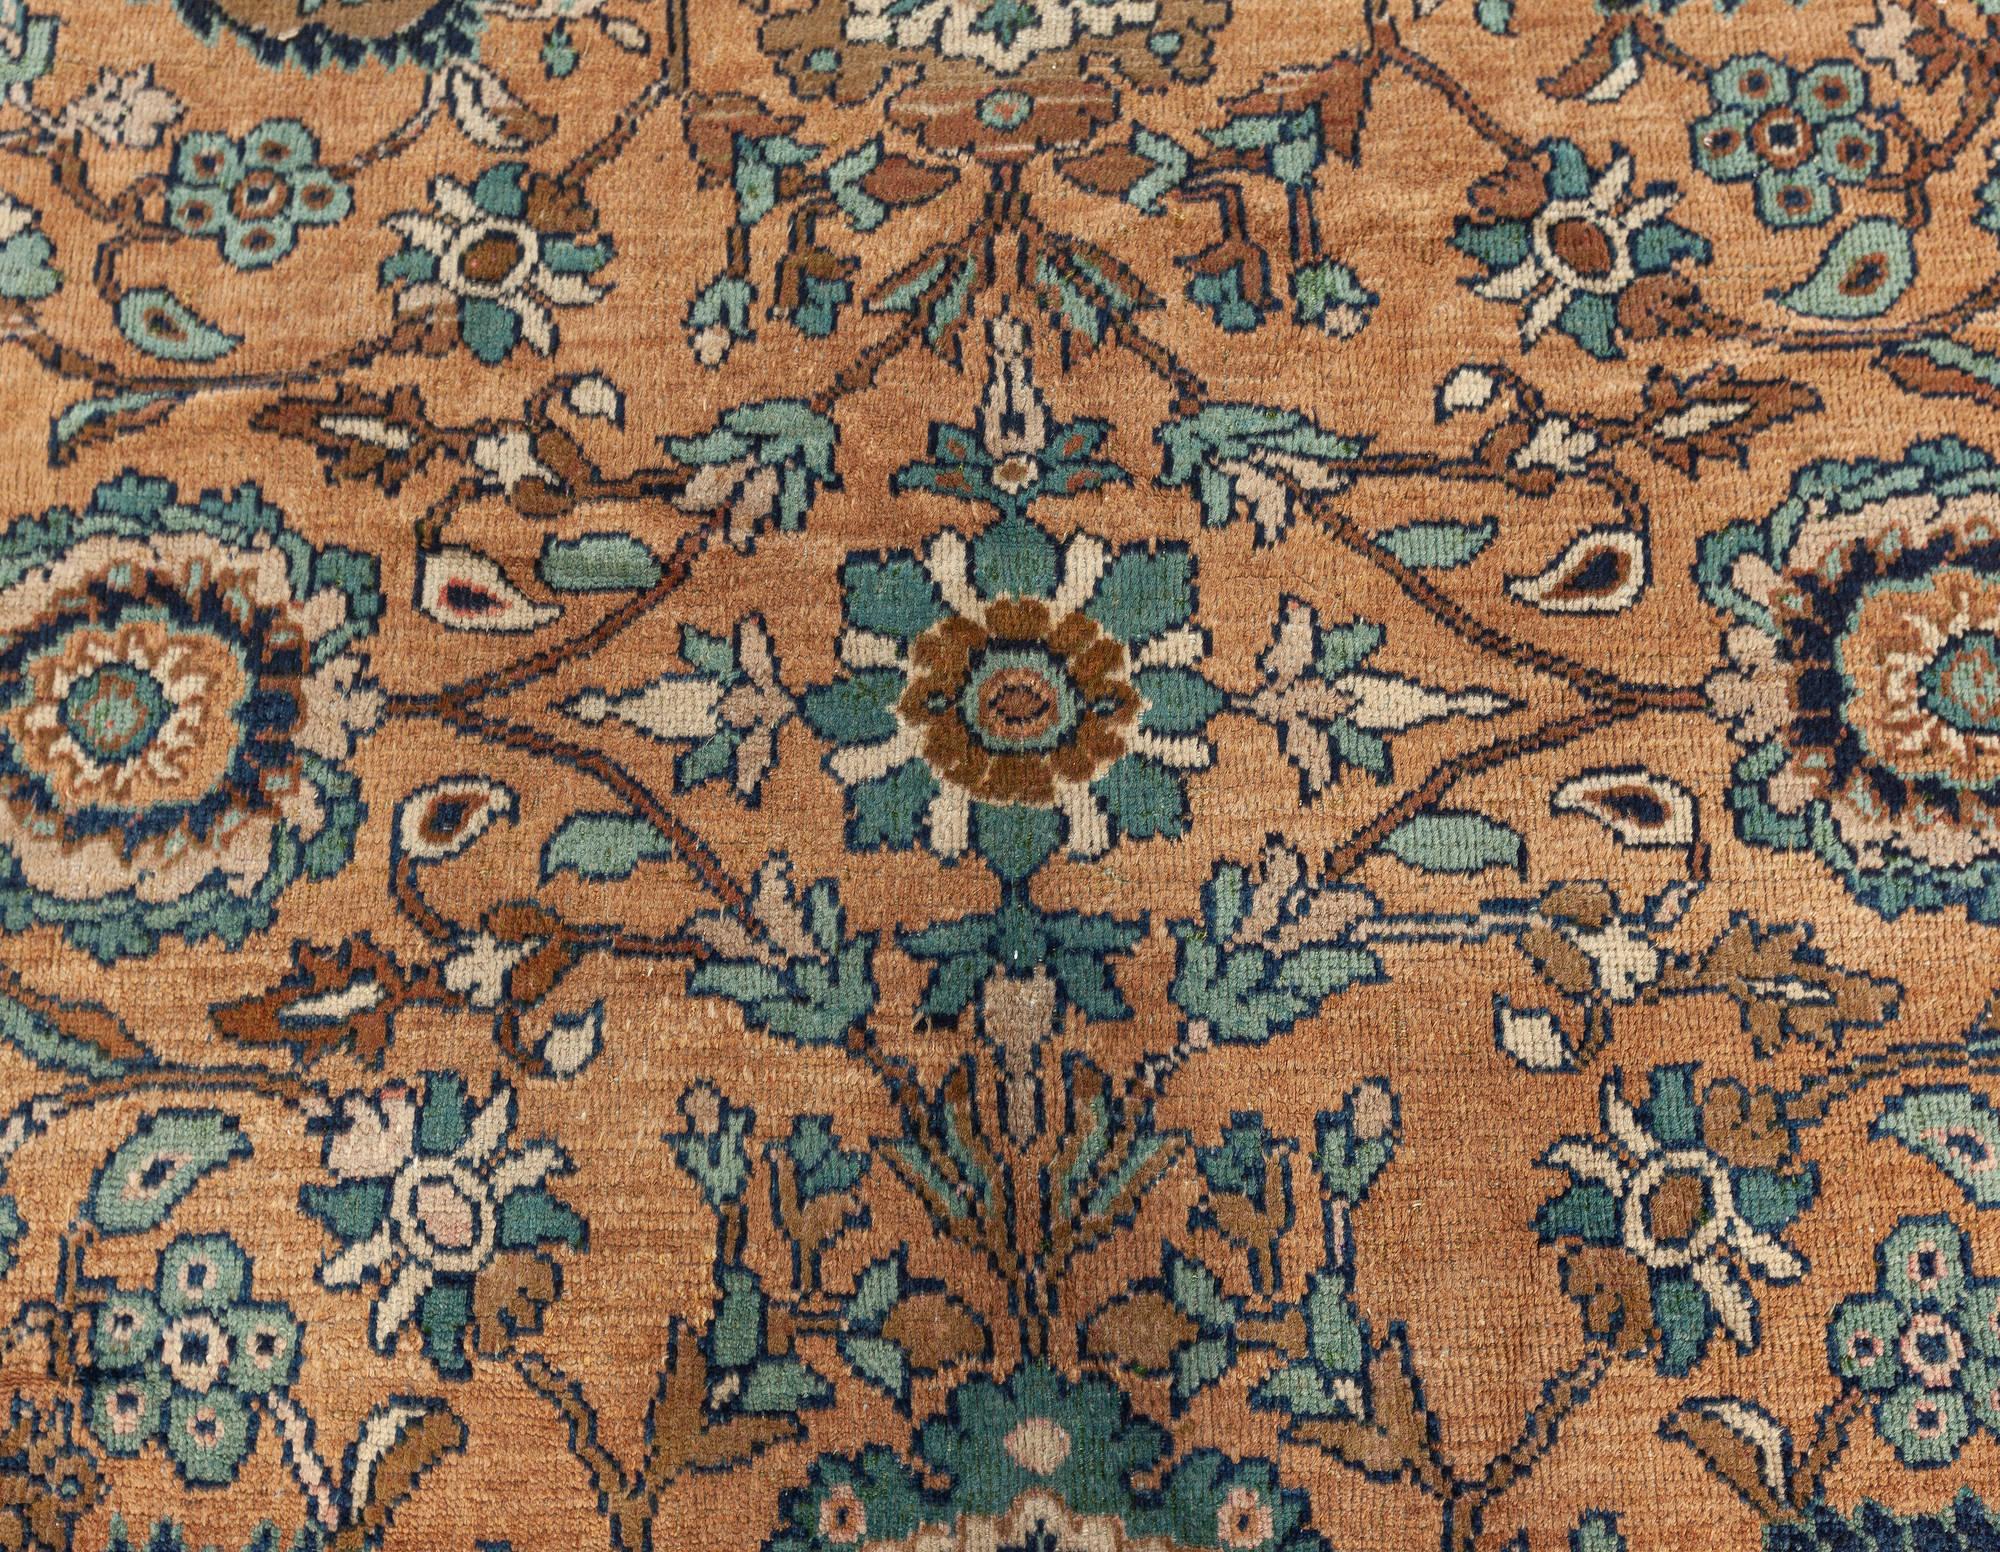 Antique Persian Sultanabad rug (Size Adjusted)
Size: 9'4